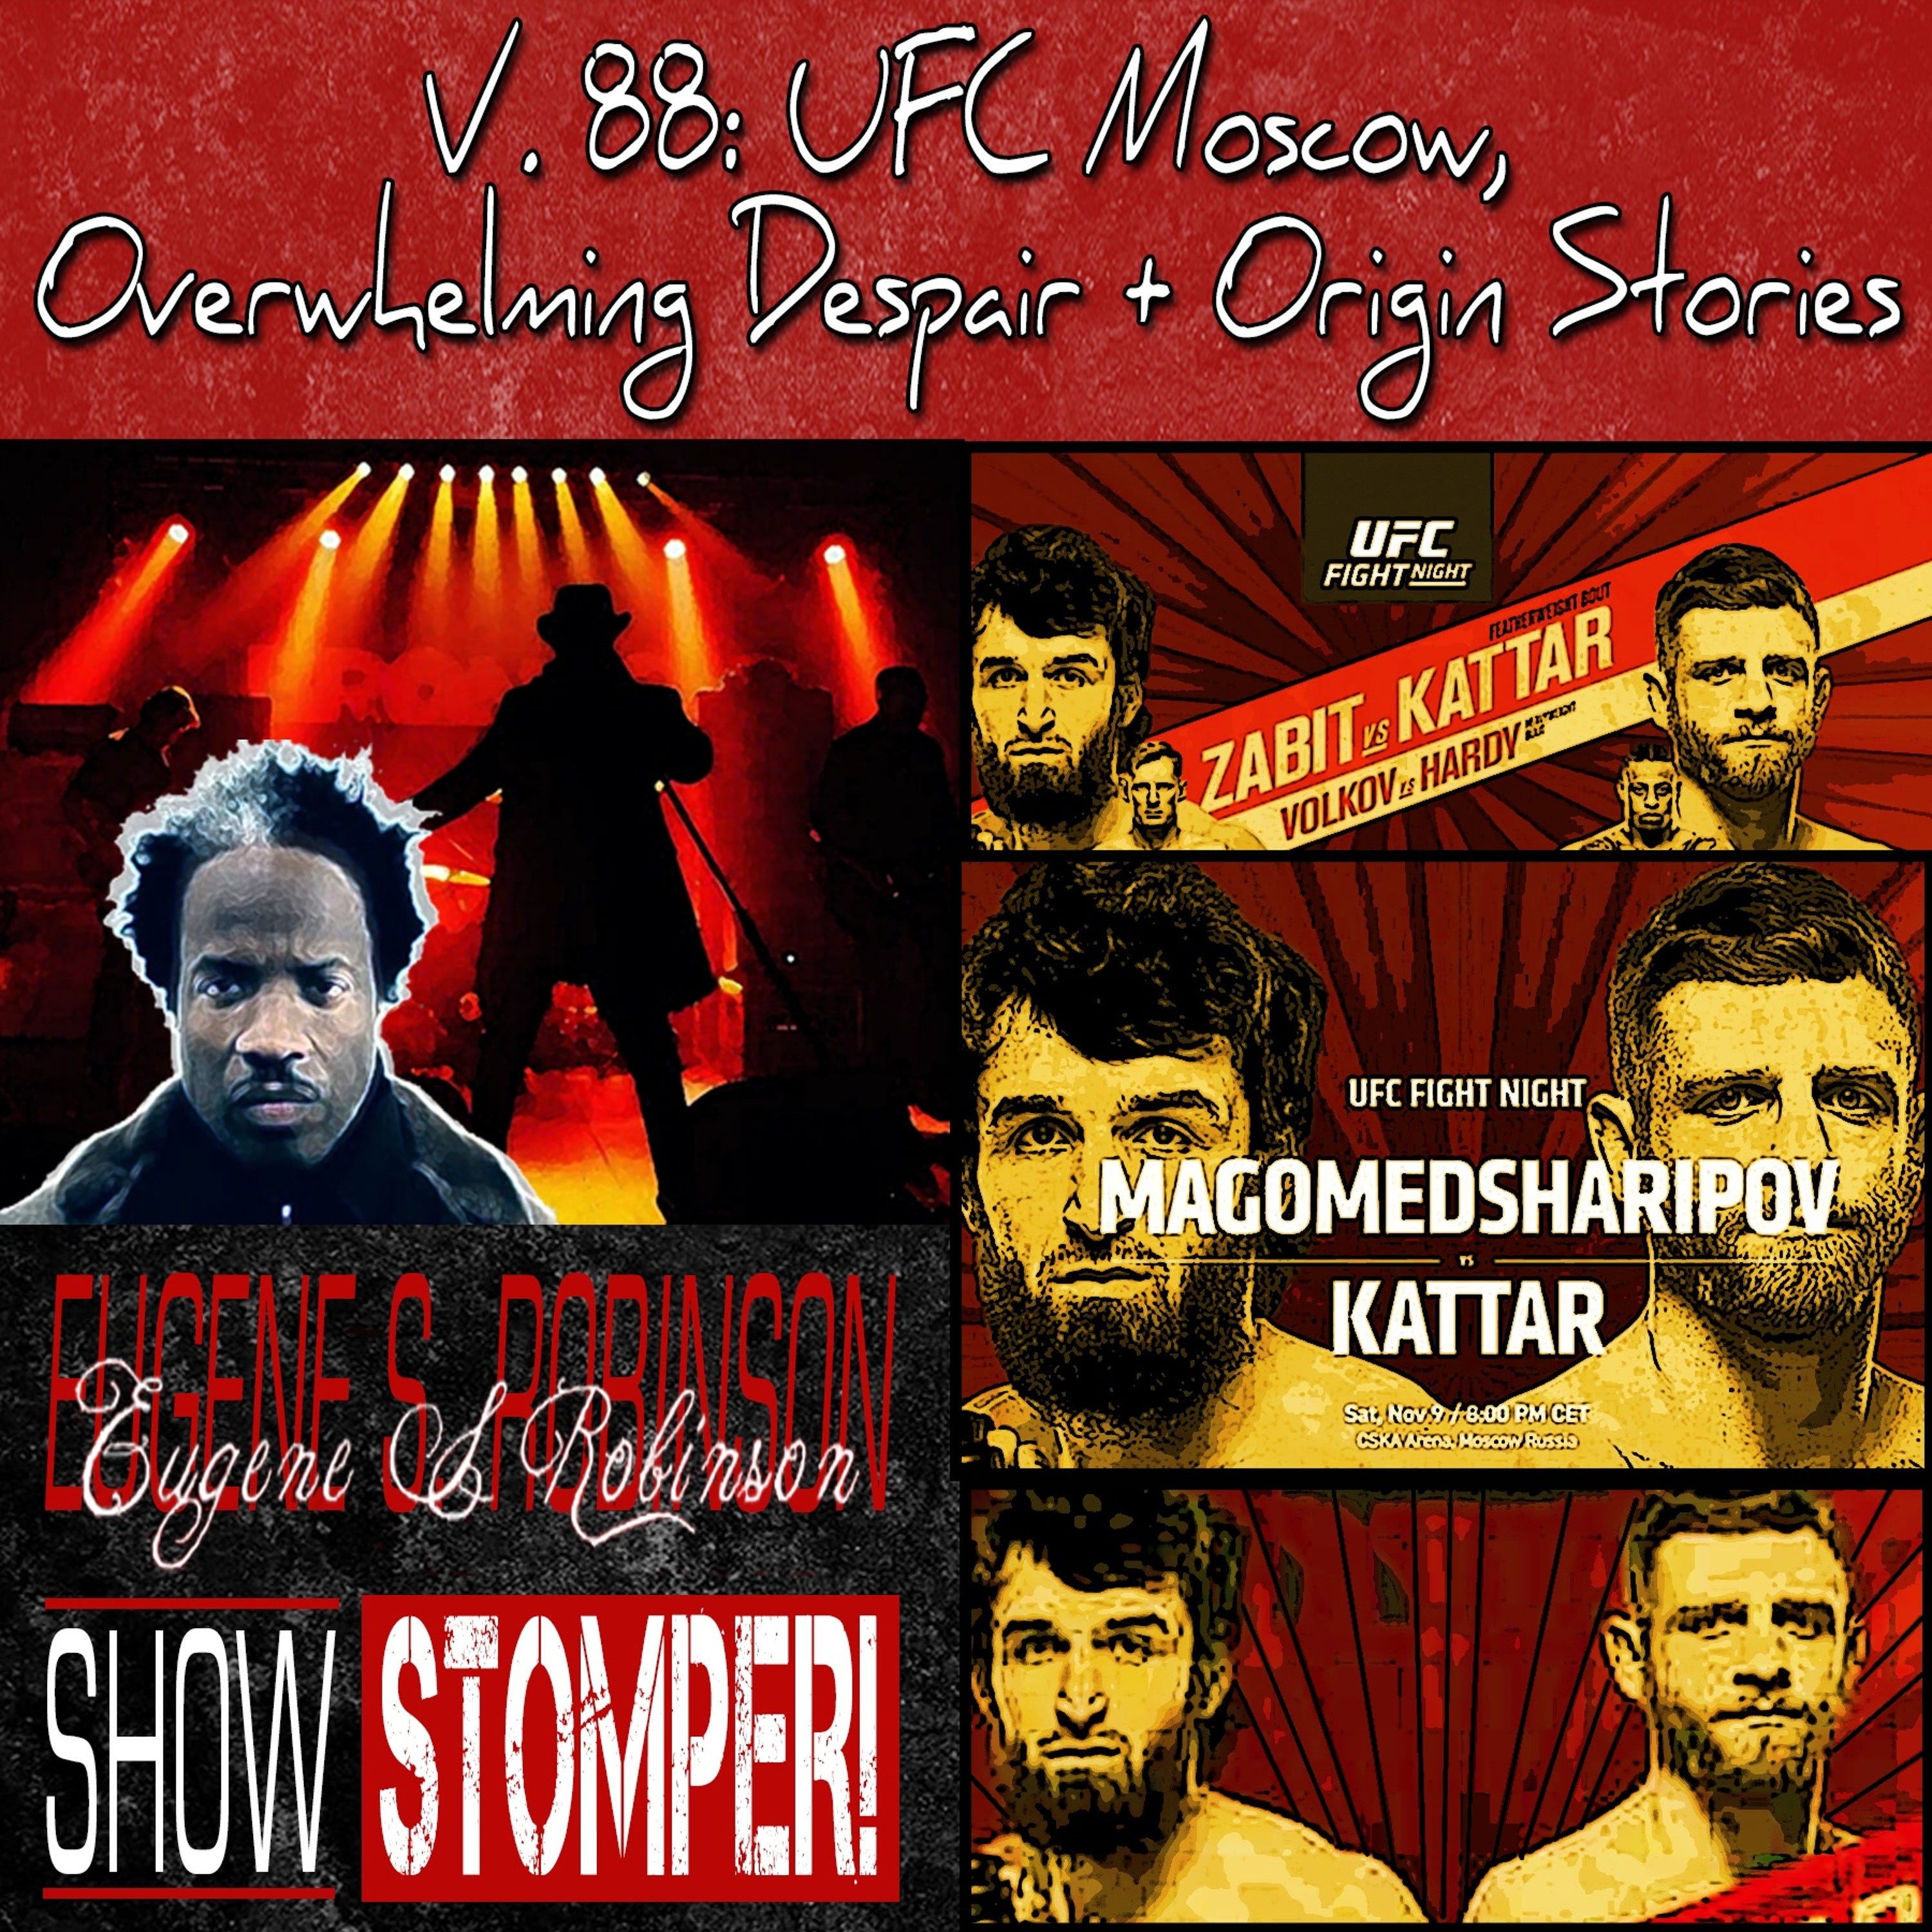 V. 88 UFC Moscow, Overwhelming Despair + Origin Stories On The Eugene S. Robinson Show Stomper!